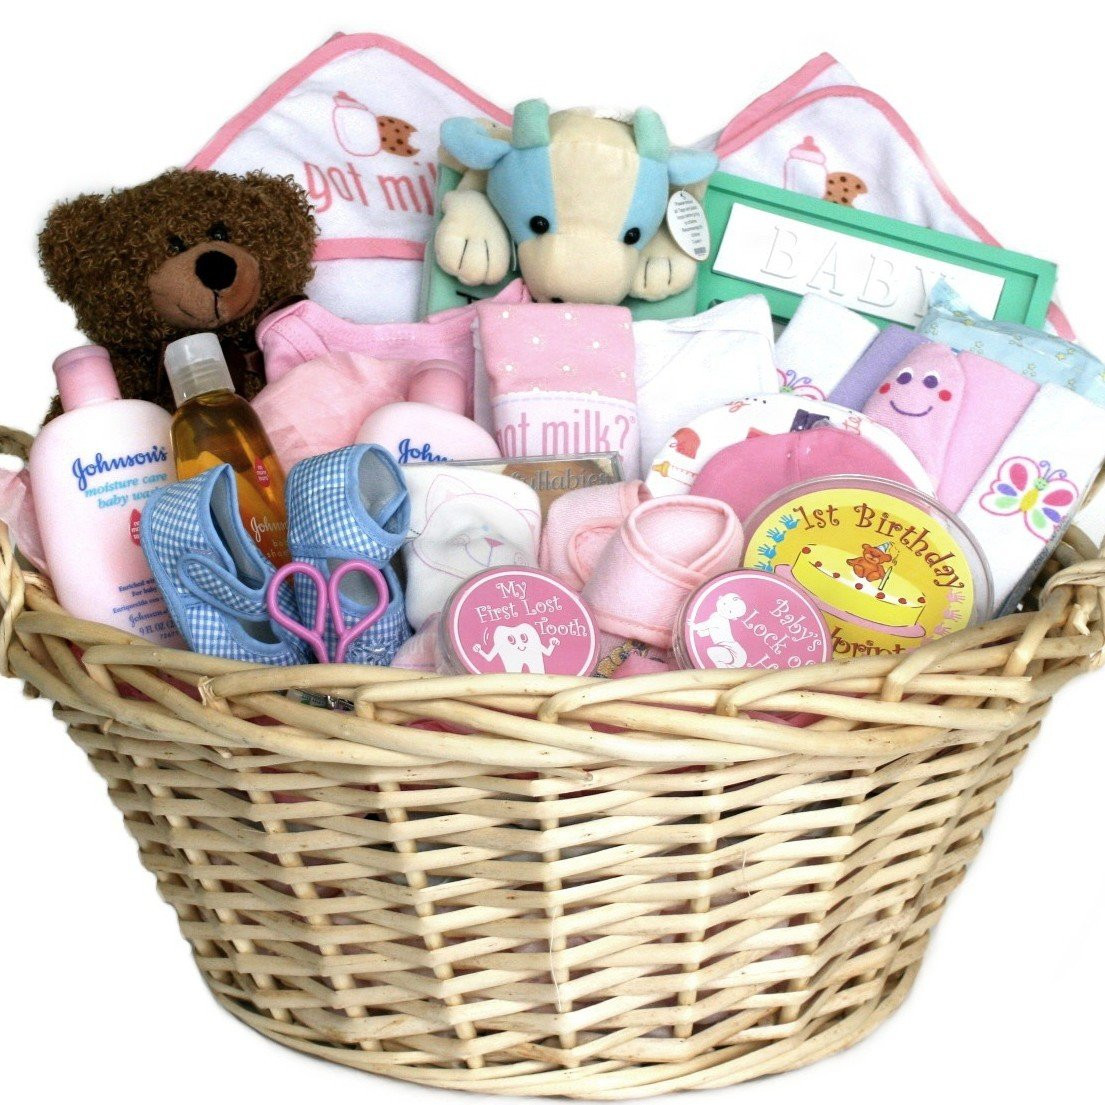 New Baby Gift Basket Ideas
 New Baby Gift Basket Ideas Gift Ftempo